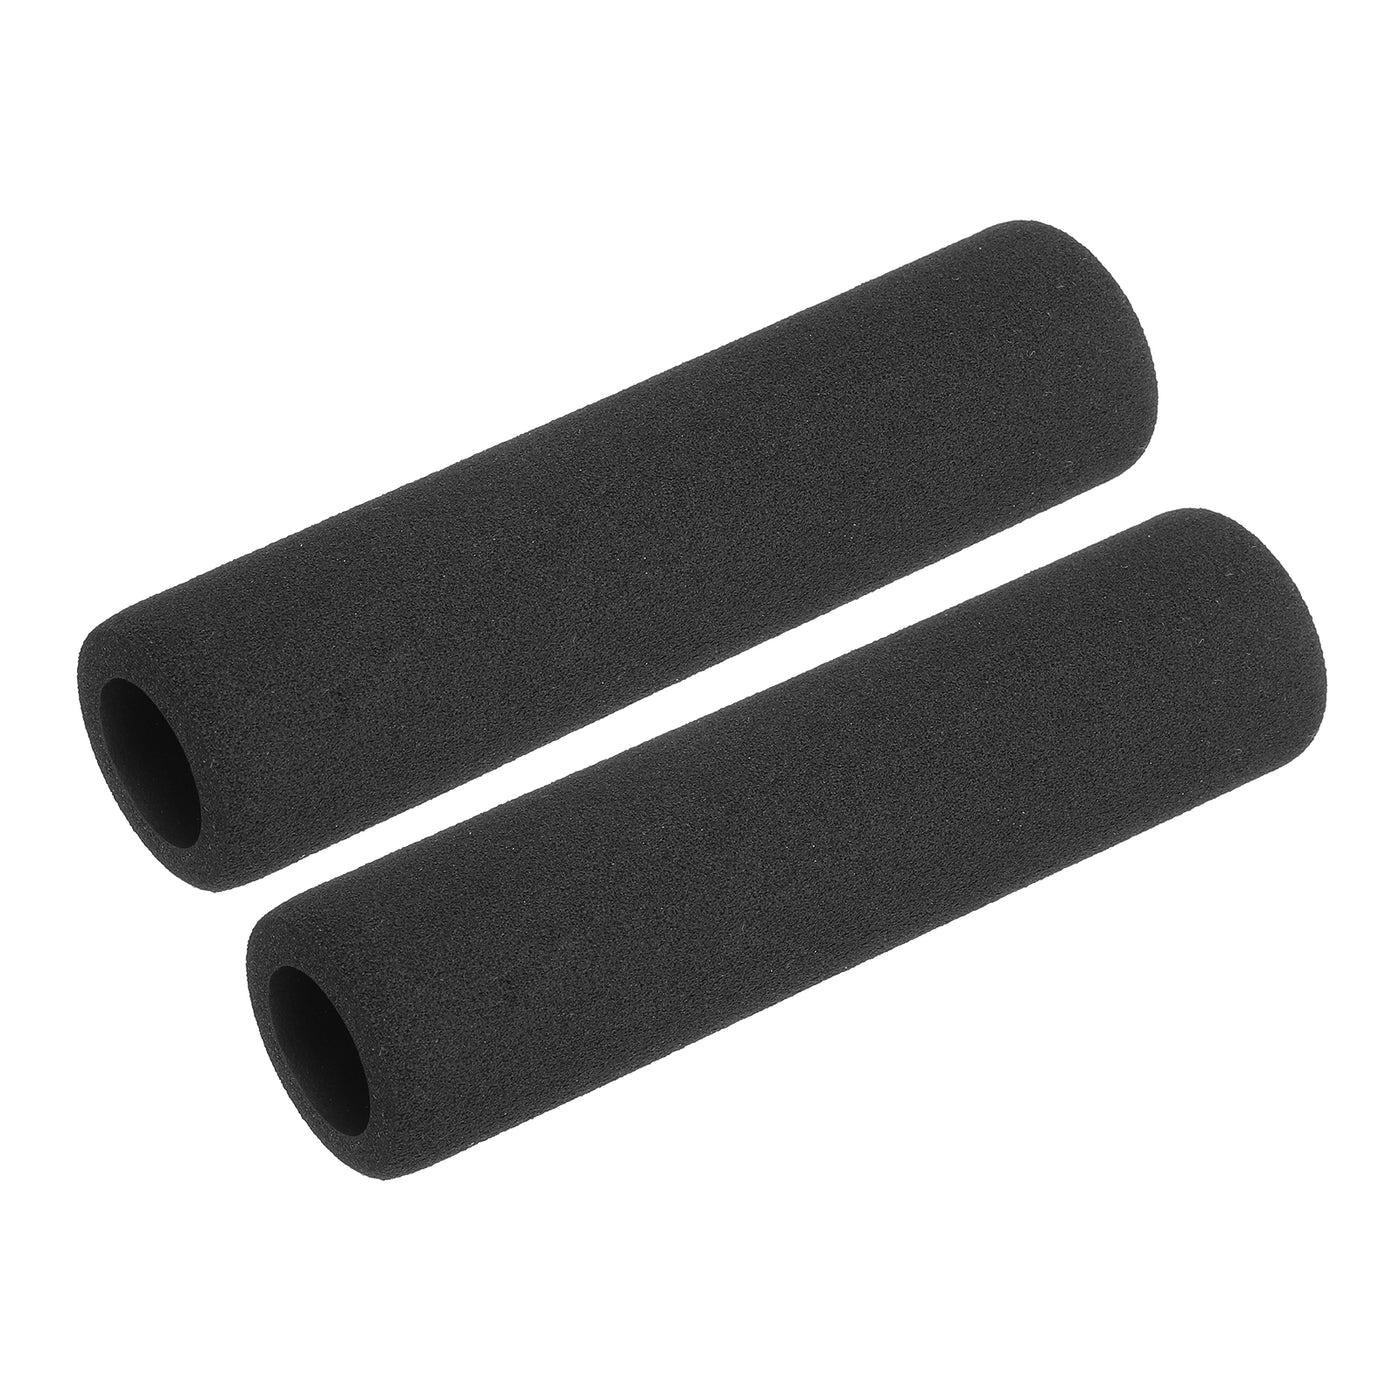 uxcell Uxcell Pipe Insulation Tube Foam Tubing for Handle Grip Support 18mm ID 28mm OD 116mm Heat Preservation Black 2pcs